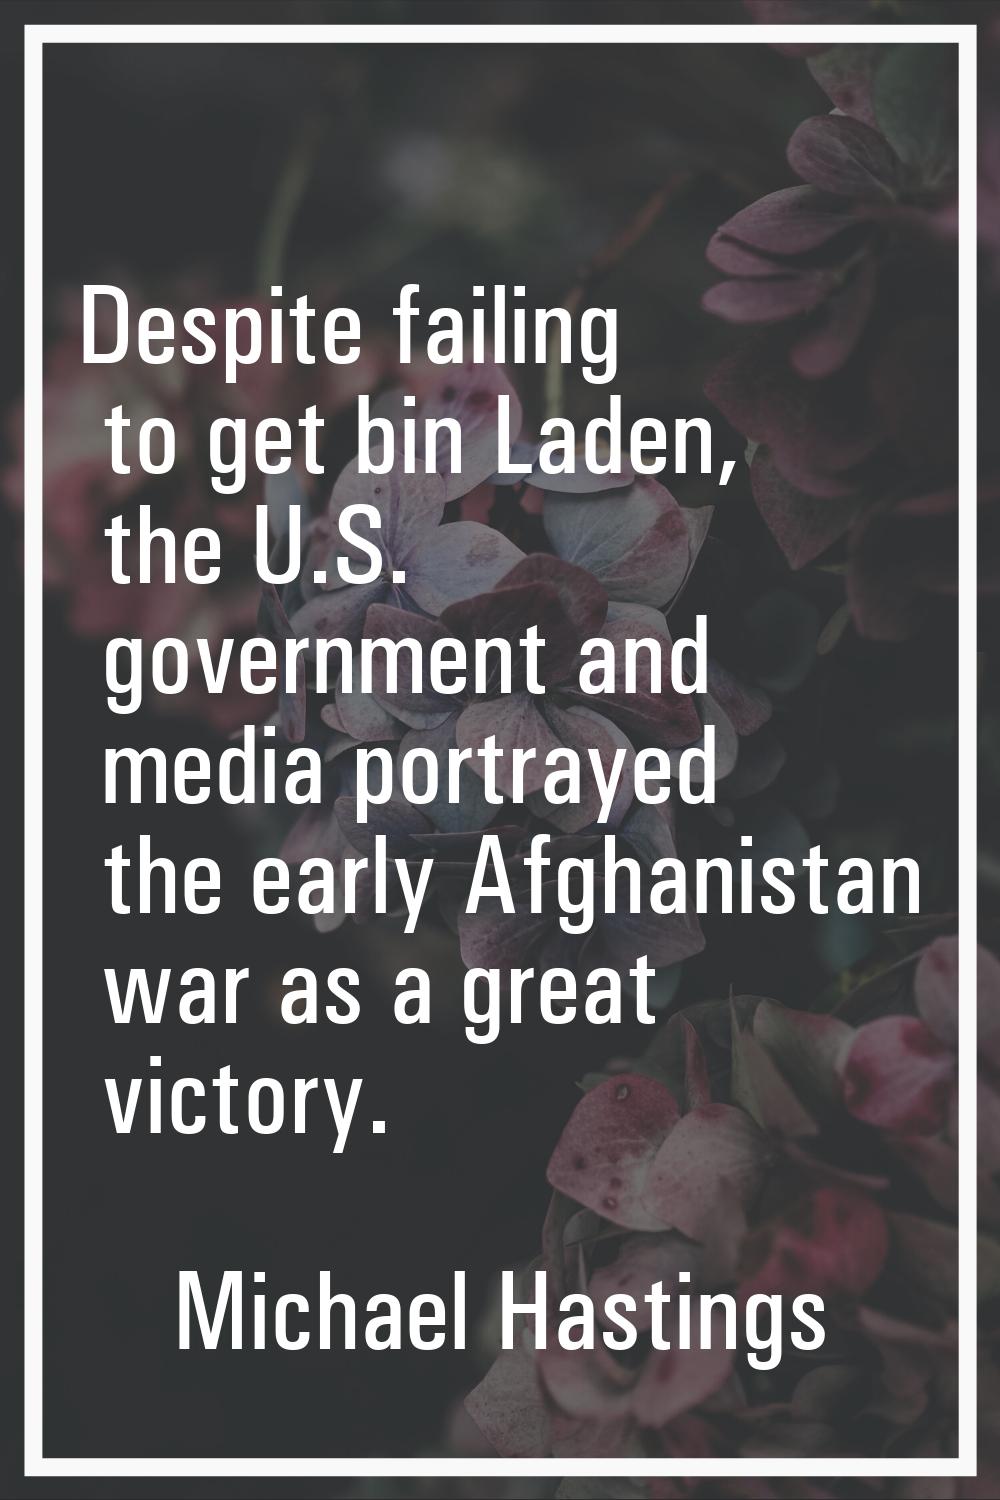 Despite failing to get bin Laden, the U.S. government and media portrayed the early Afghanistan war